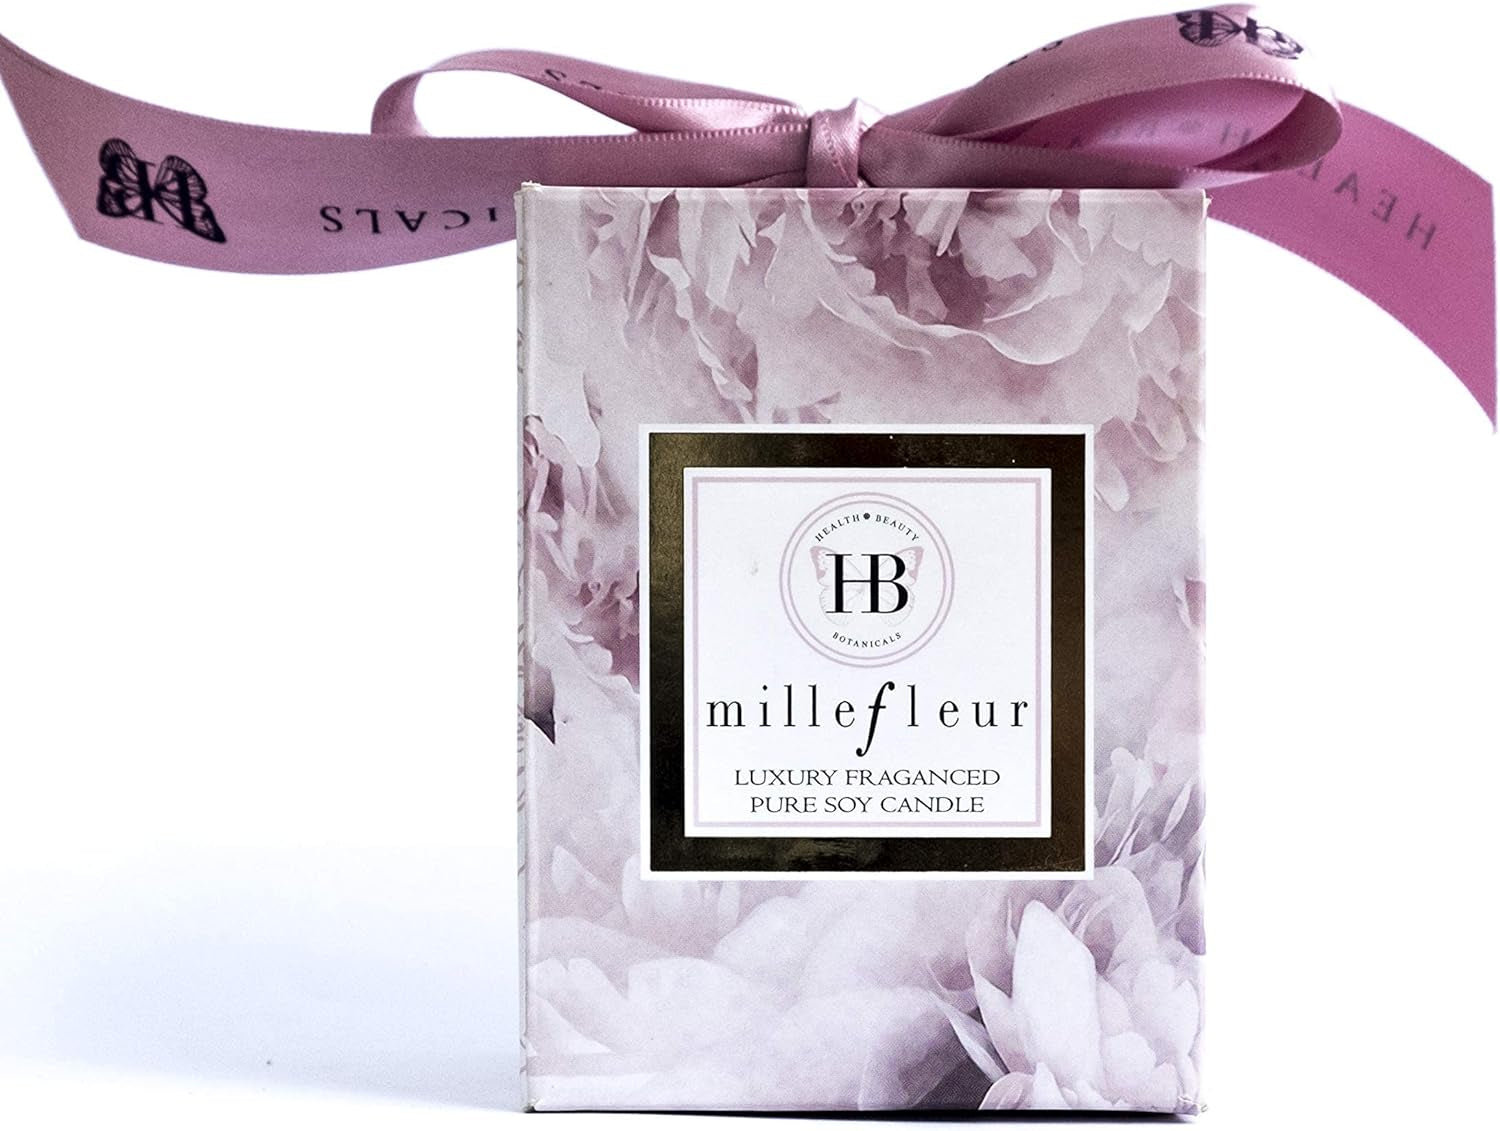 HB Botanicals Candle Millefleur Limited Edition/Luxury Scented Soy Candles/Hand Poured, Highly Scented & Clean Burn/7.5 Oz Frosted Pink Jar/Gold Embossed Gift Box/Color Printed Inner Box/Satin Bow.